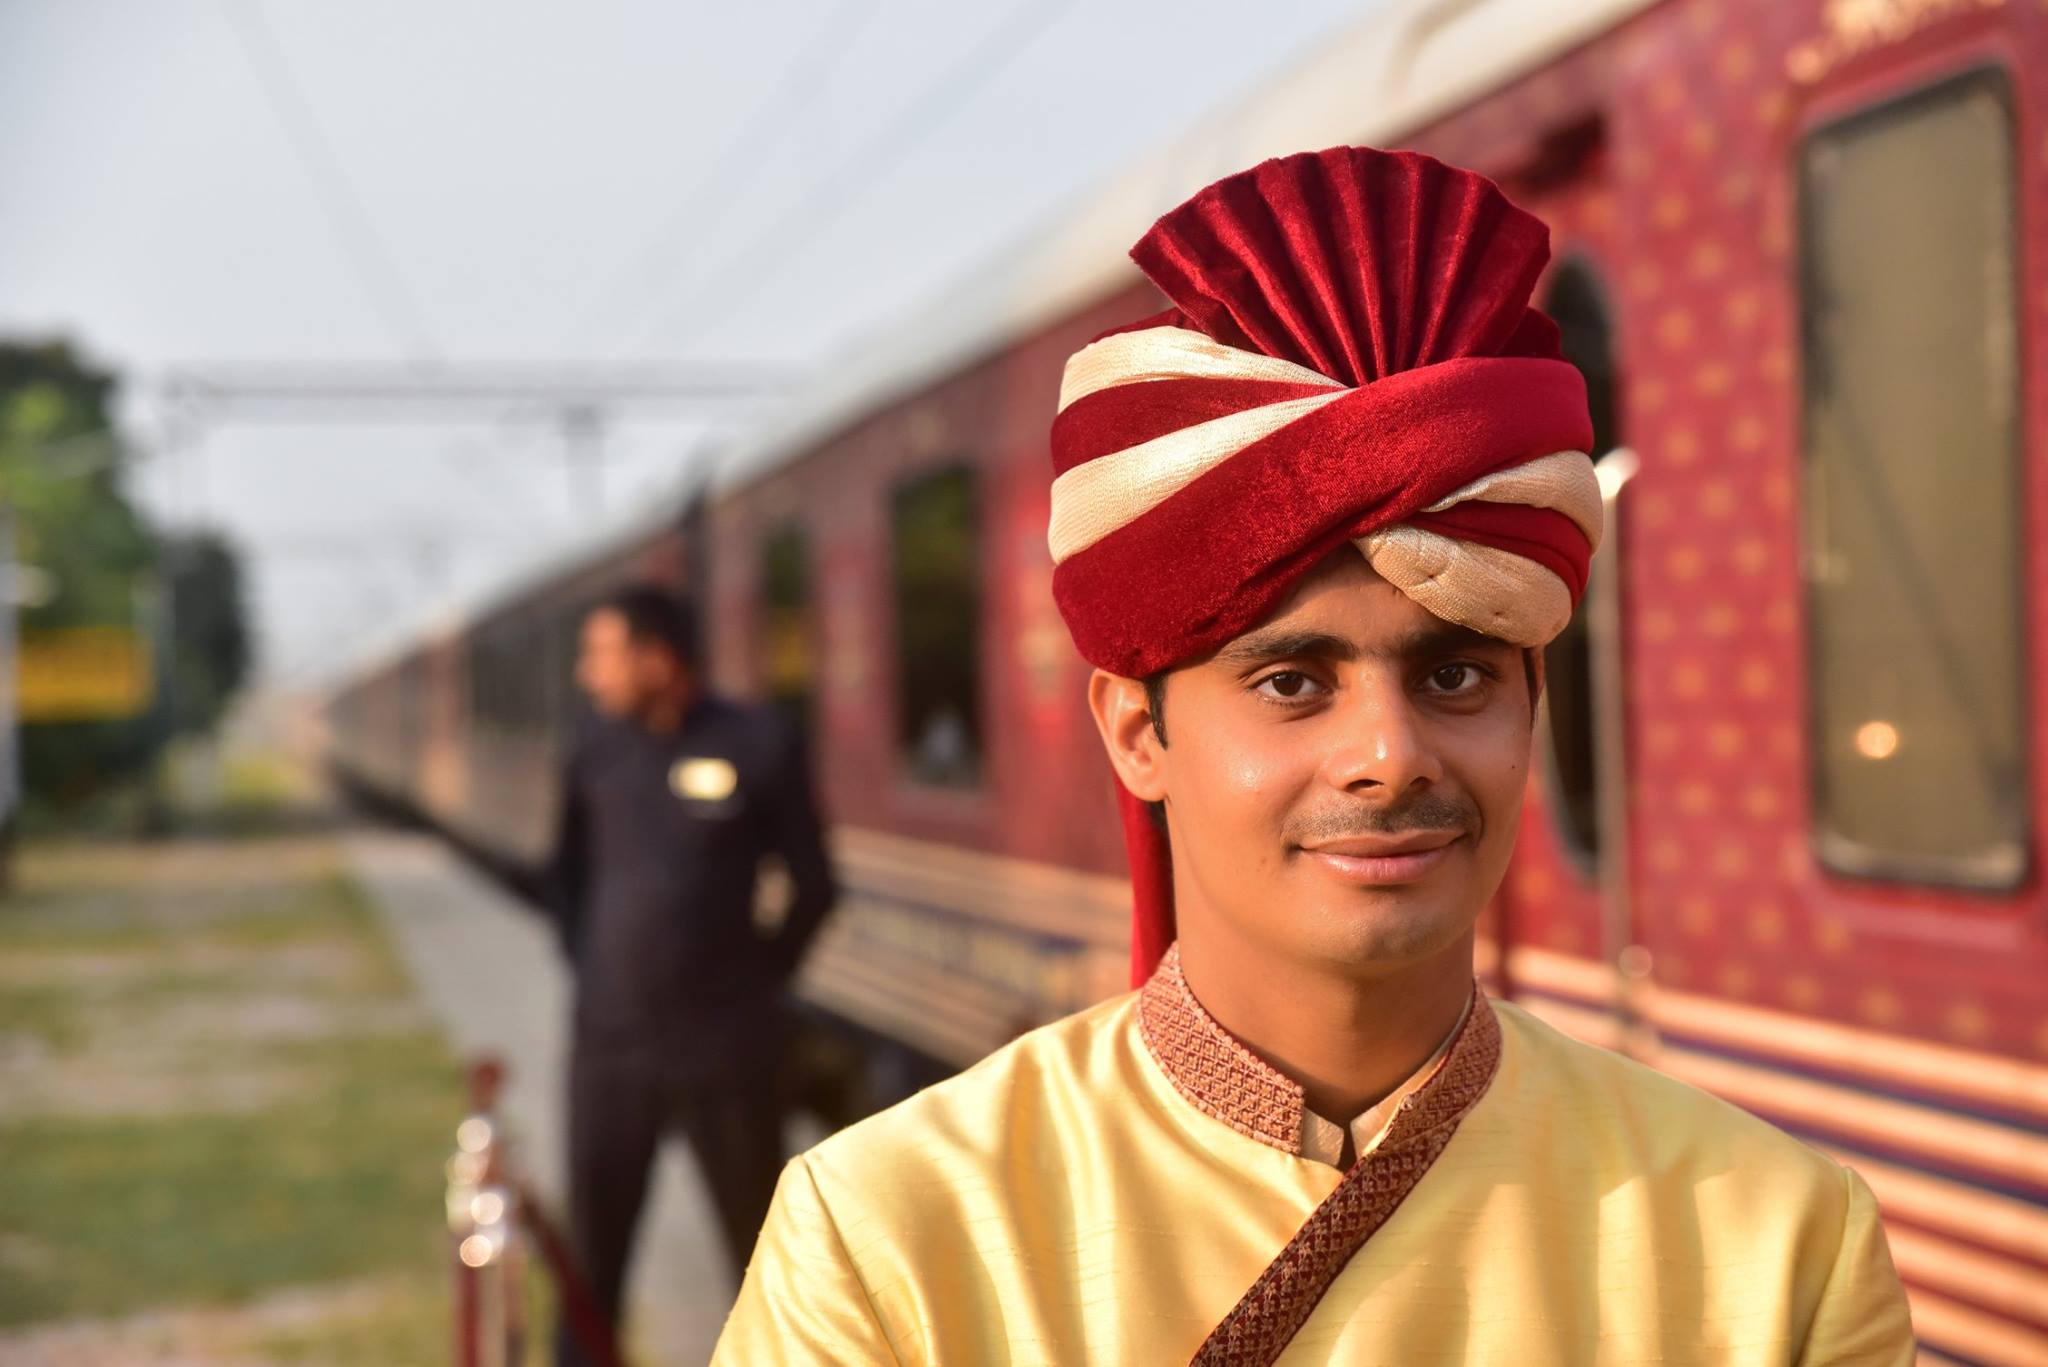 Nick Walton explores the temples, stately palaces and mountain forts of Northern India aboard one of the world’s most luxurious trains, the Maharajas' Express.